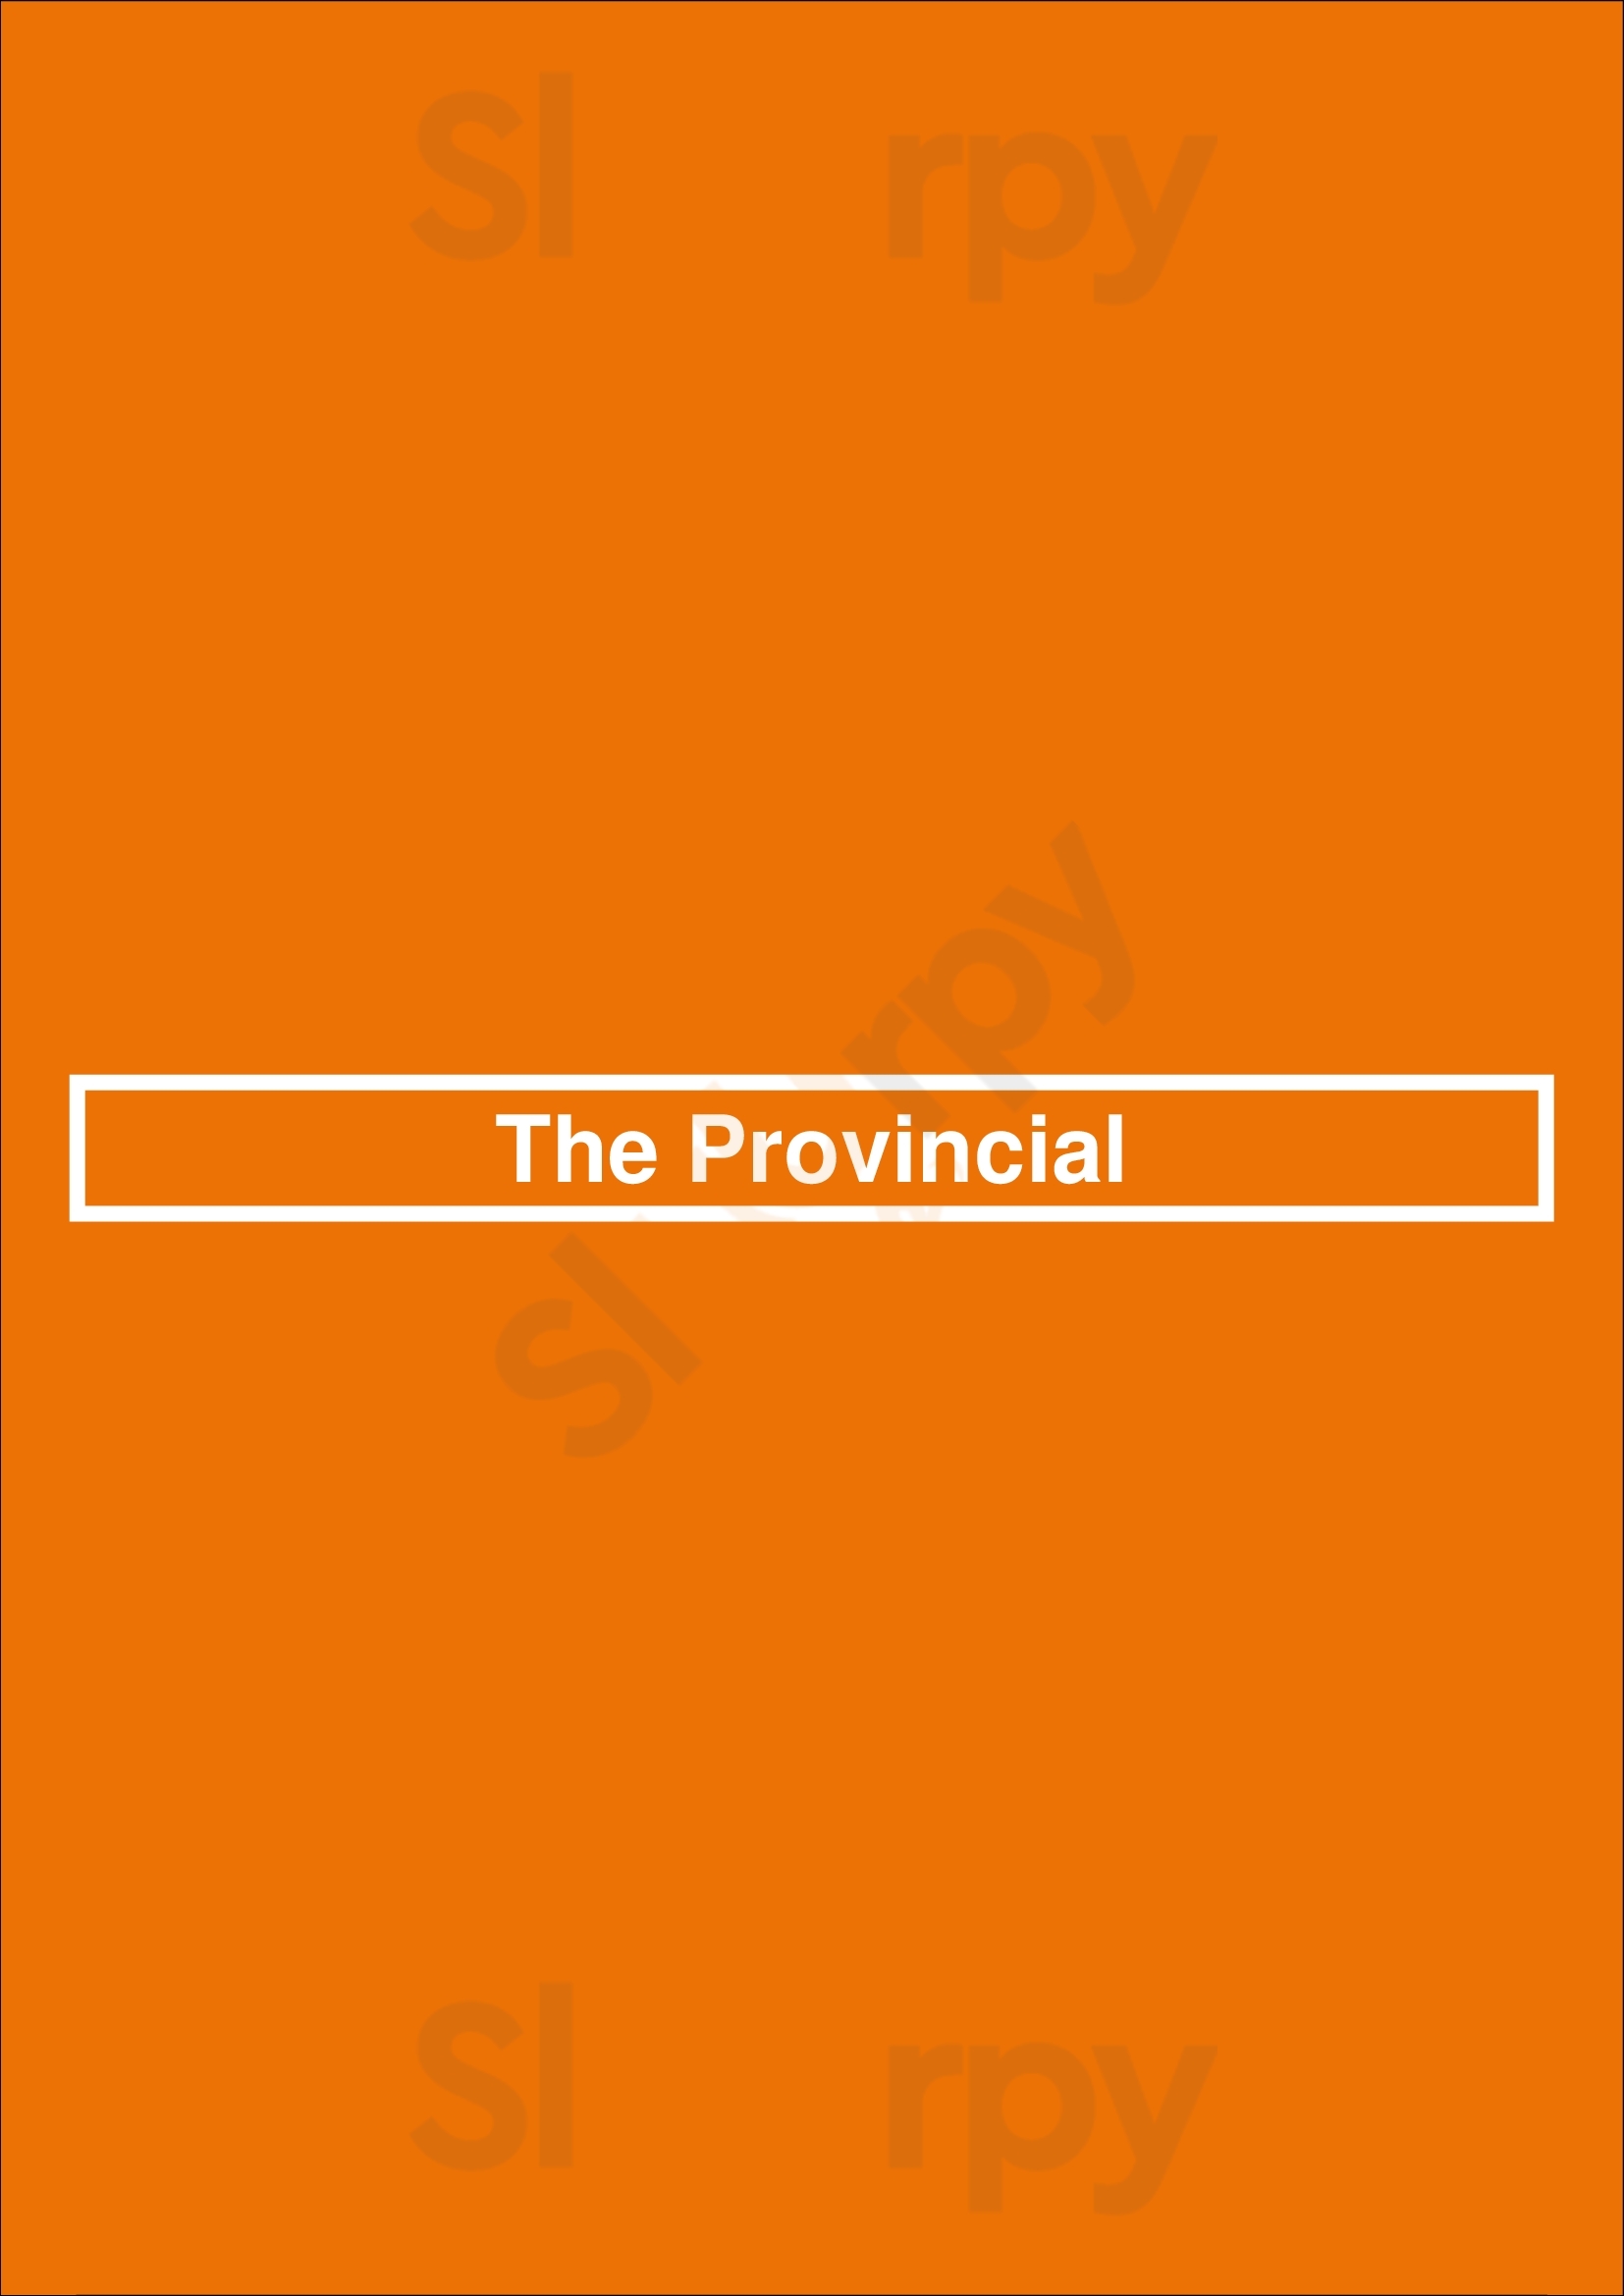 The Provincial Fredericton Menu - 1